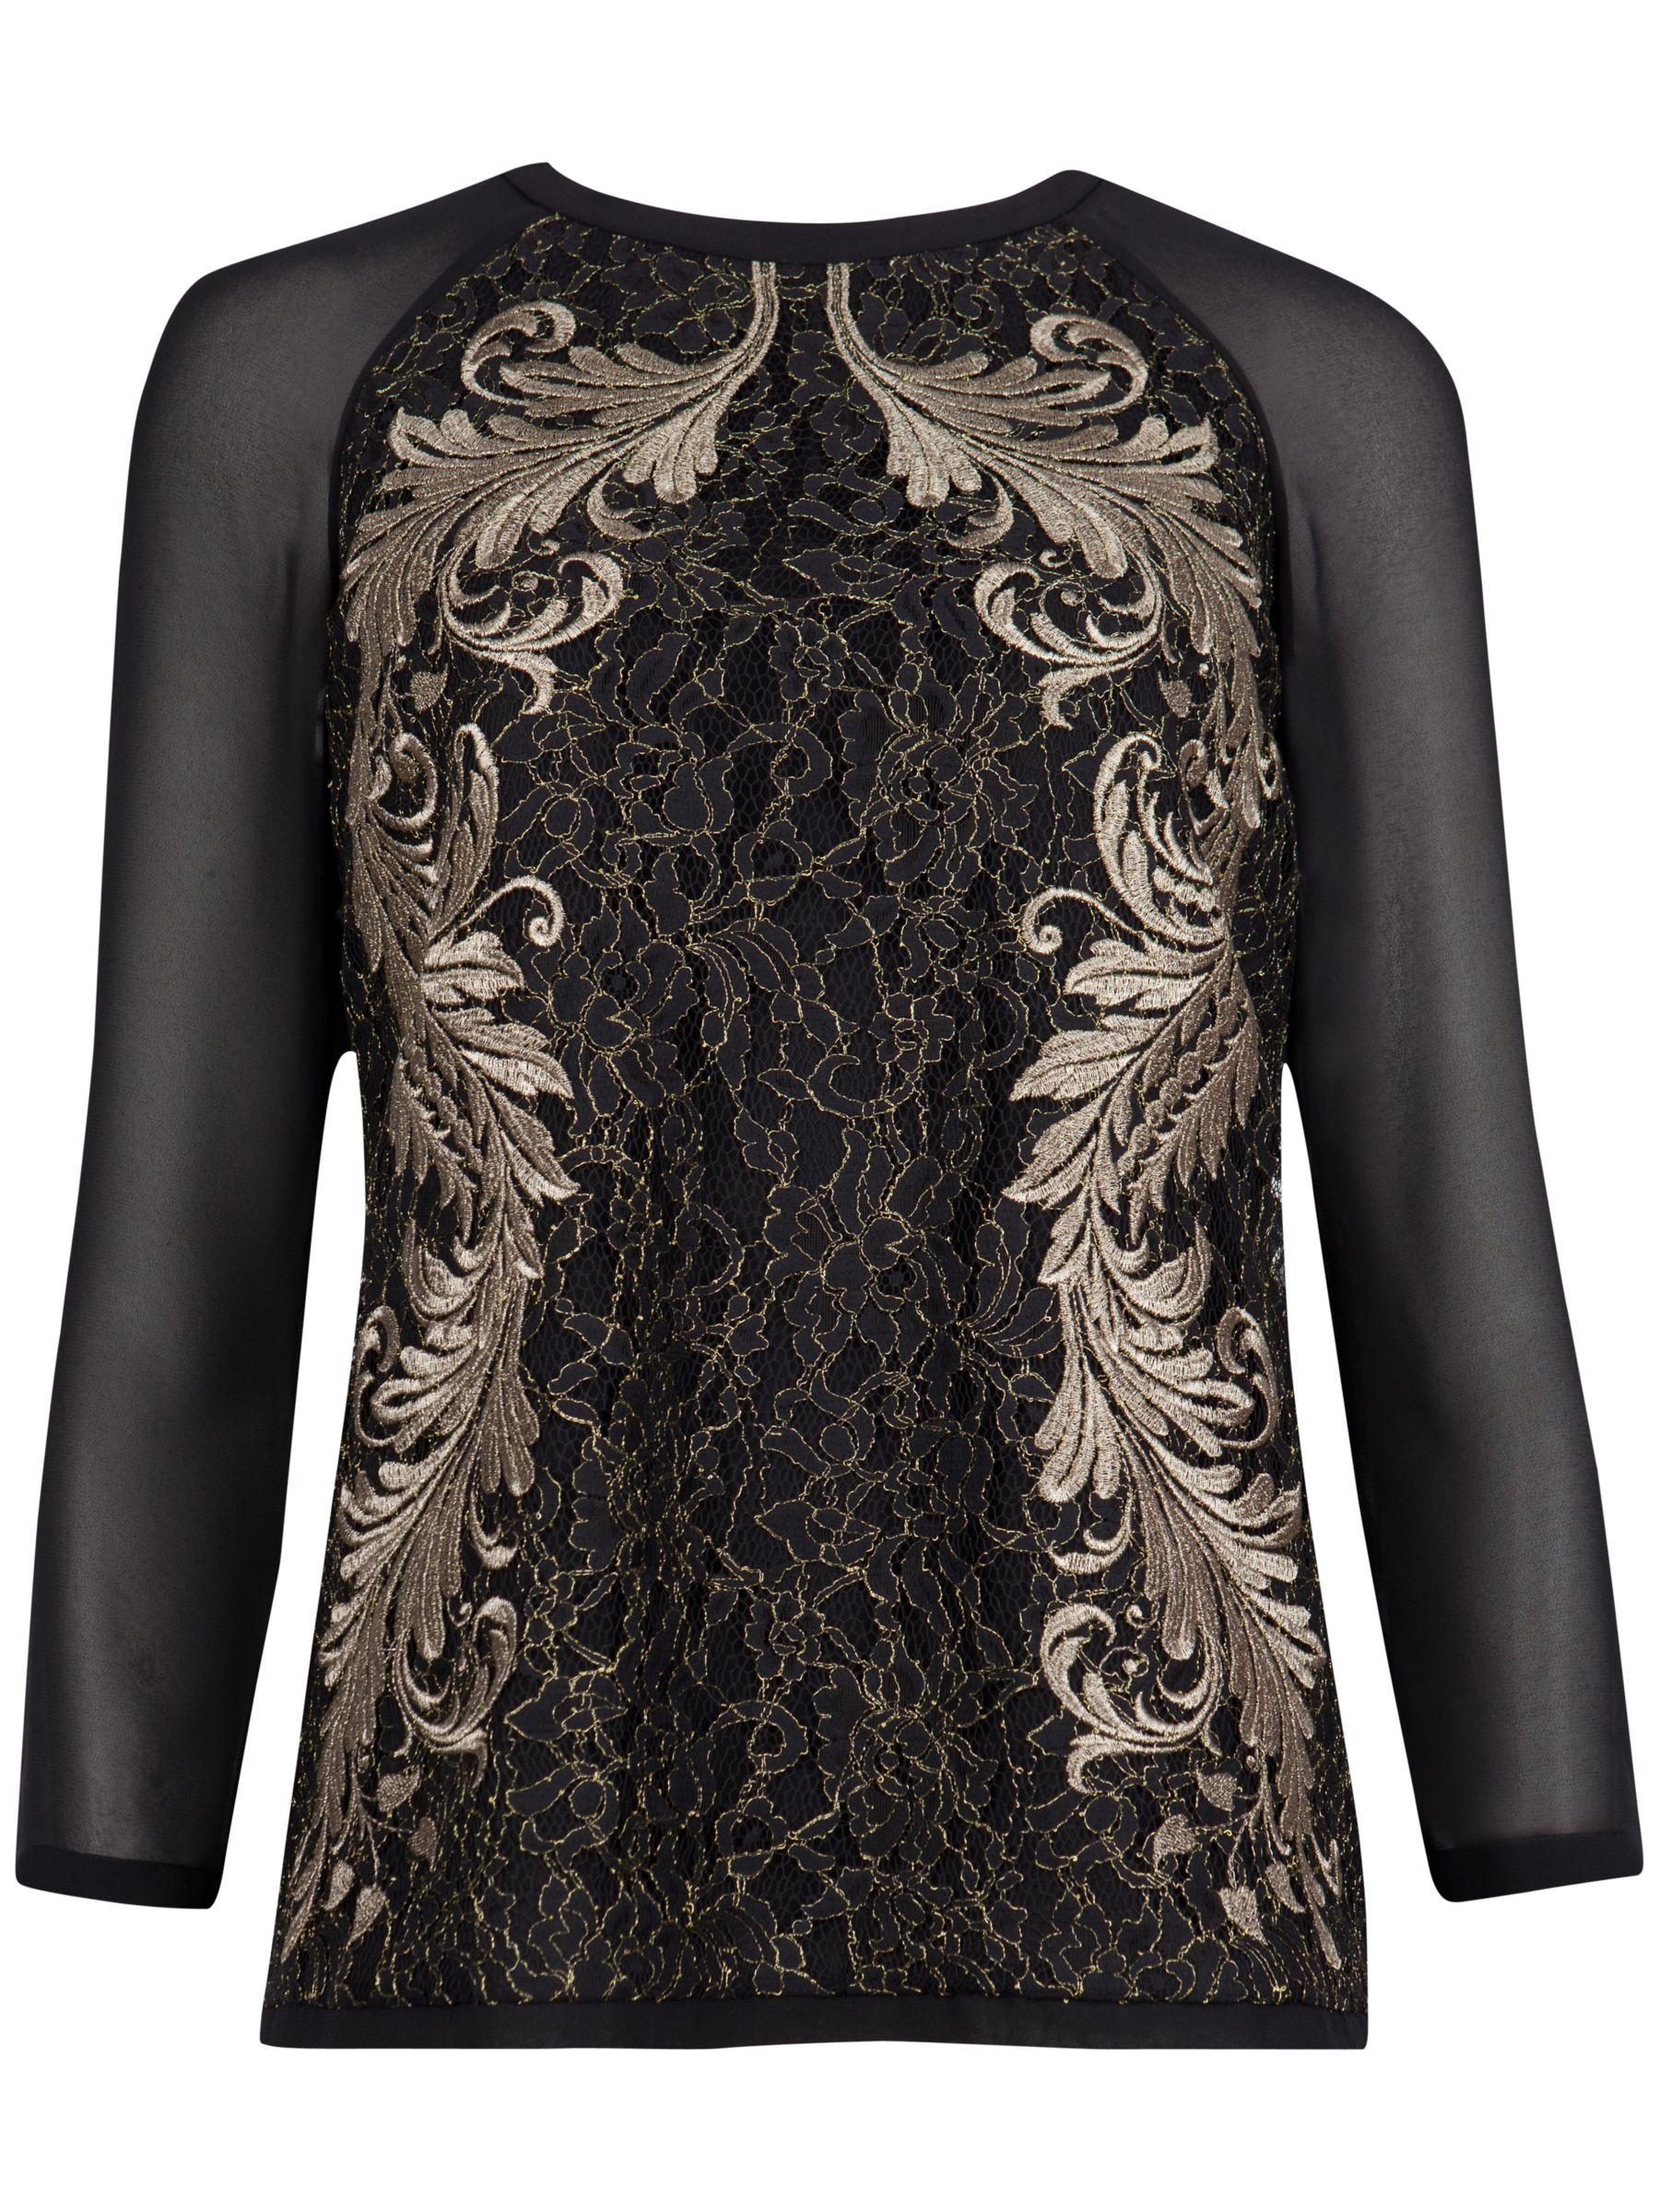 Buy Ted Baker Embroidered Front Lace Top, Gold Online at johnlewis.com